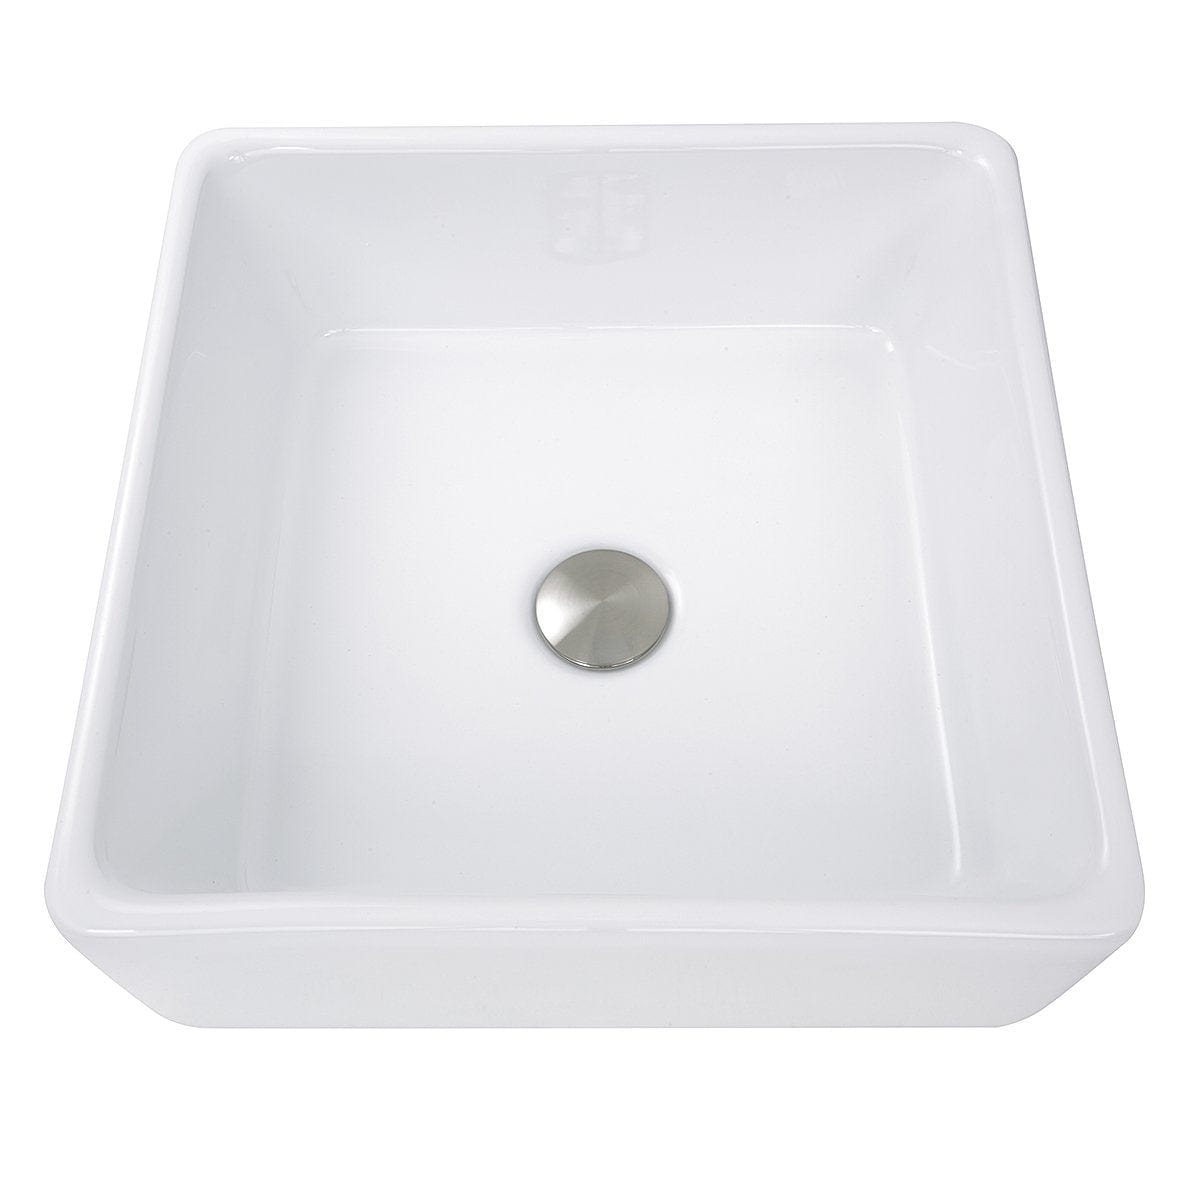 Nantucket Square White Vessel Sink - NSV107A - Manor House Sinks